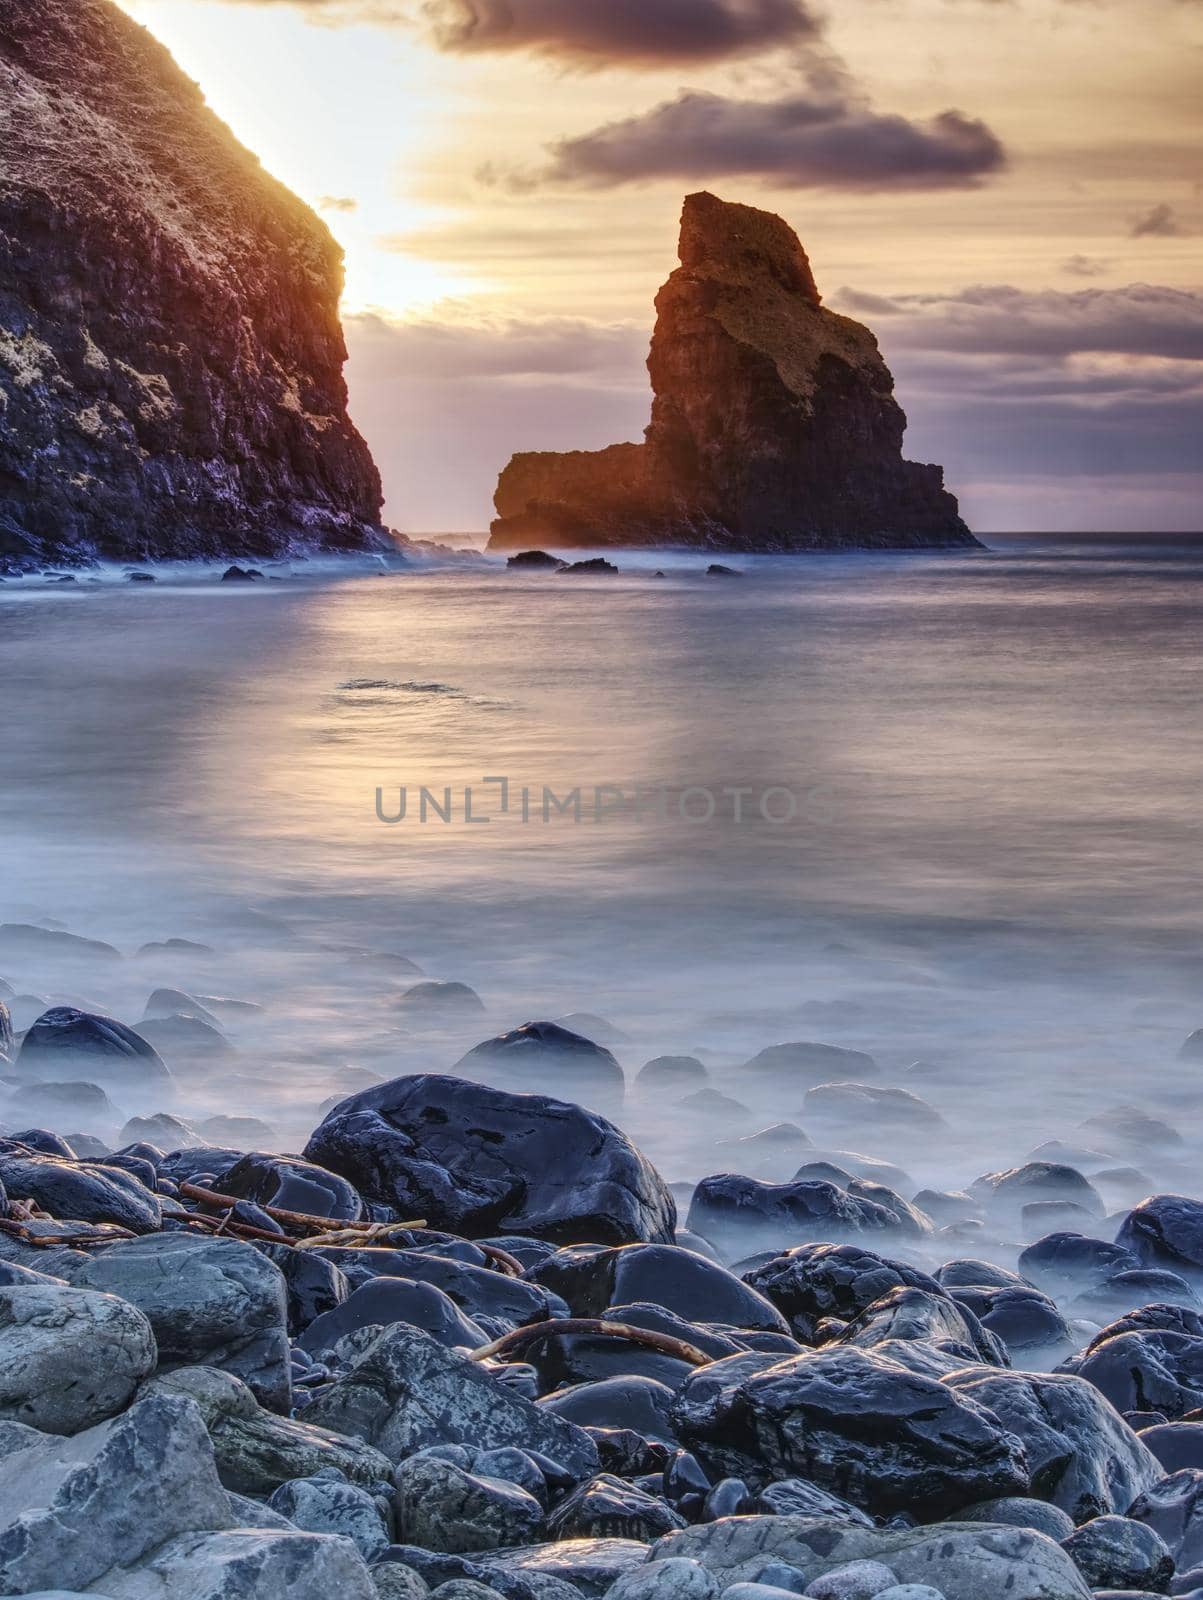 Rocky coast of sea. Slow shutter speed for smooth water level. Visite Talisker Bay on the Isle of Skye in Scotland at sunset